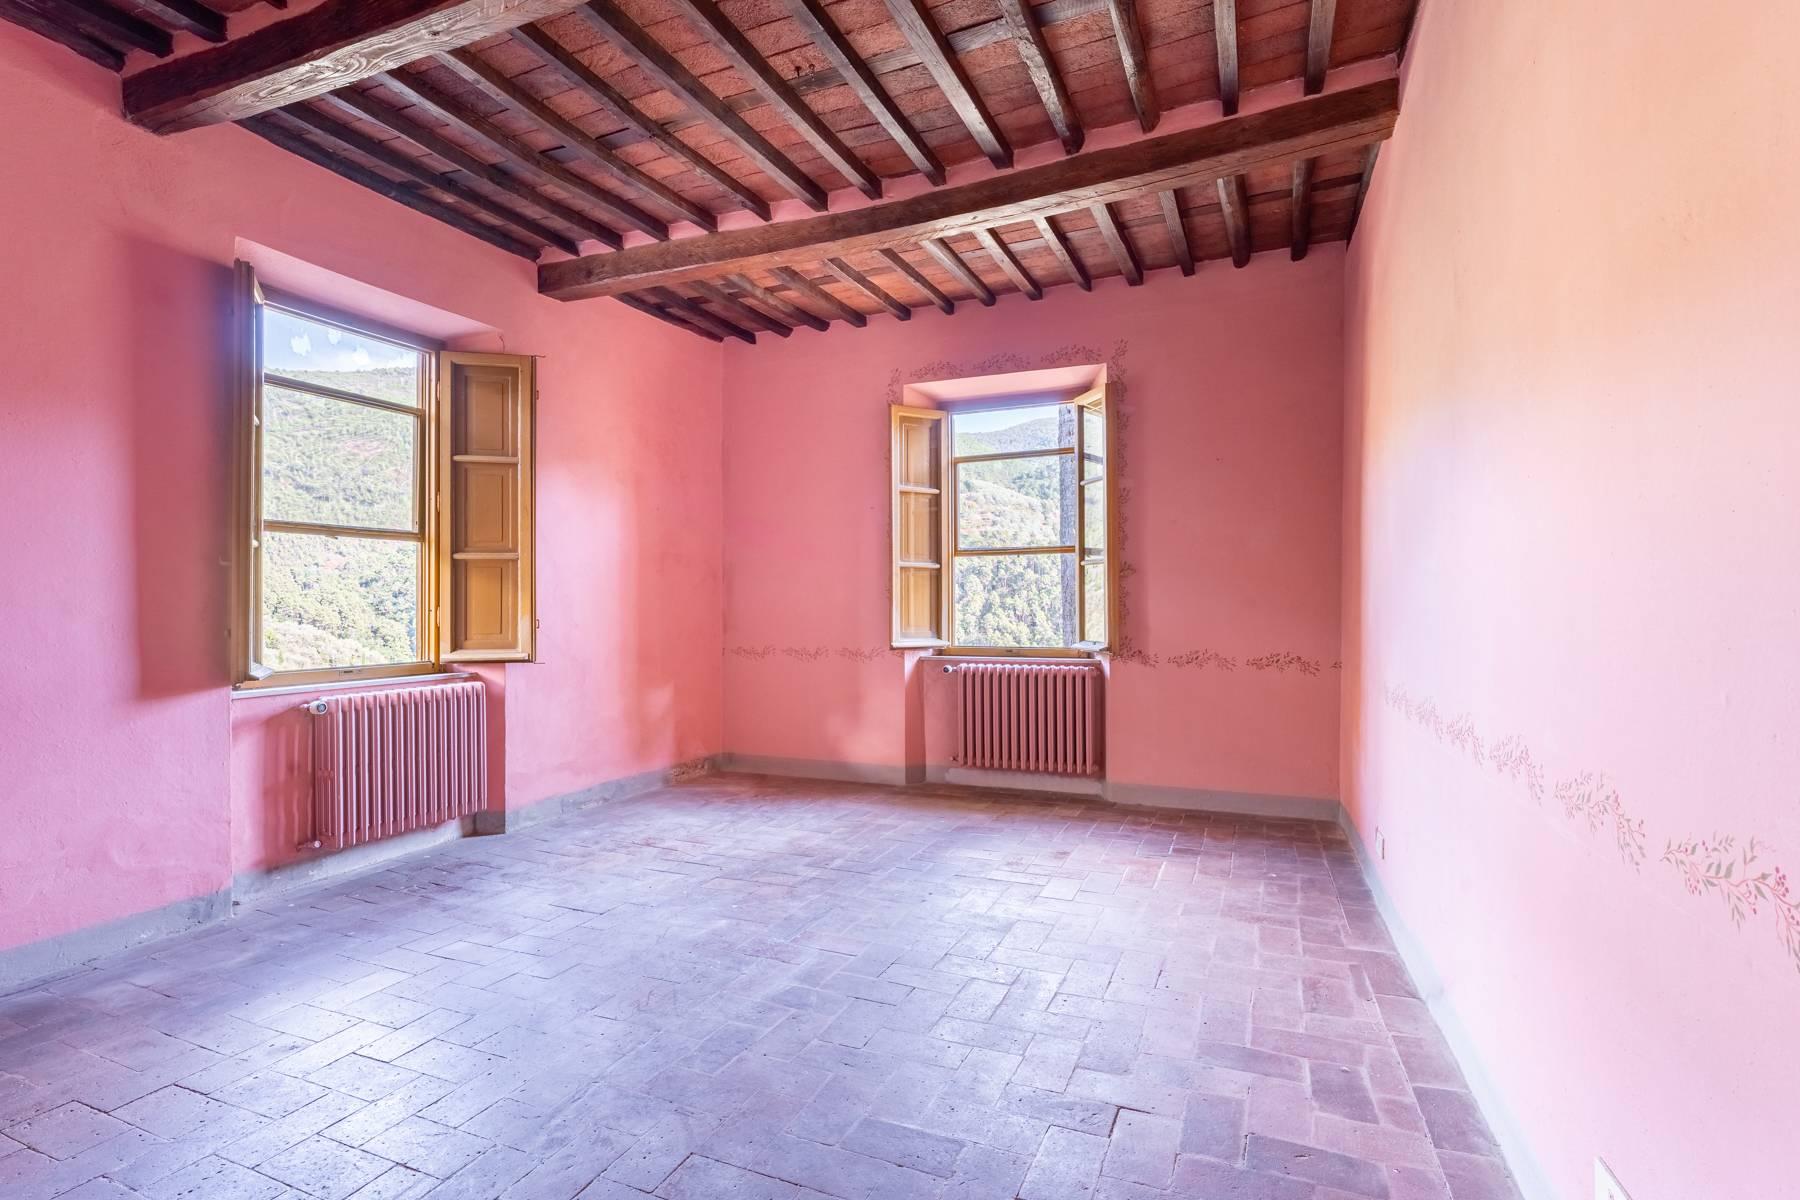 Superb villa with breathtaking views of the Lucca countryside - 18